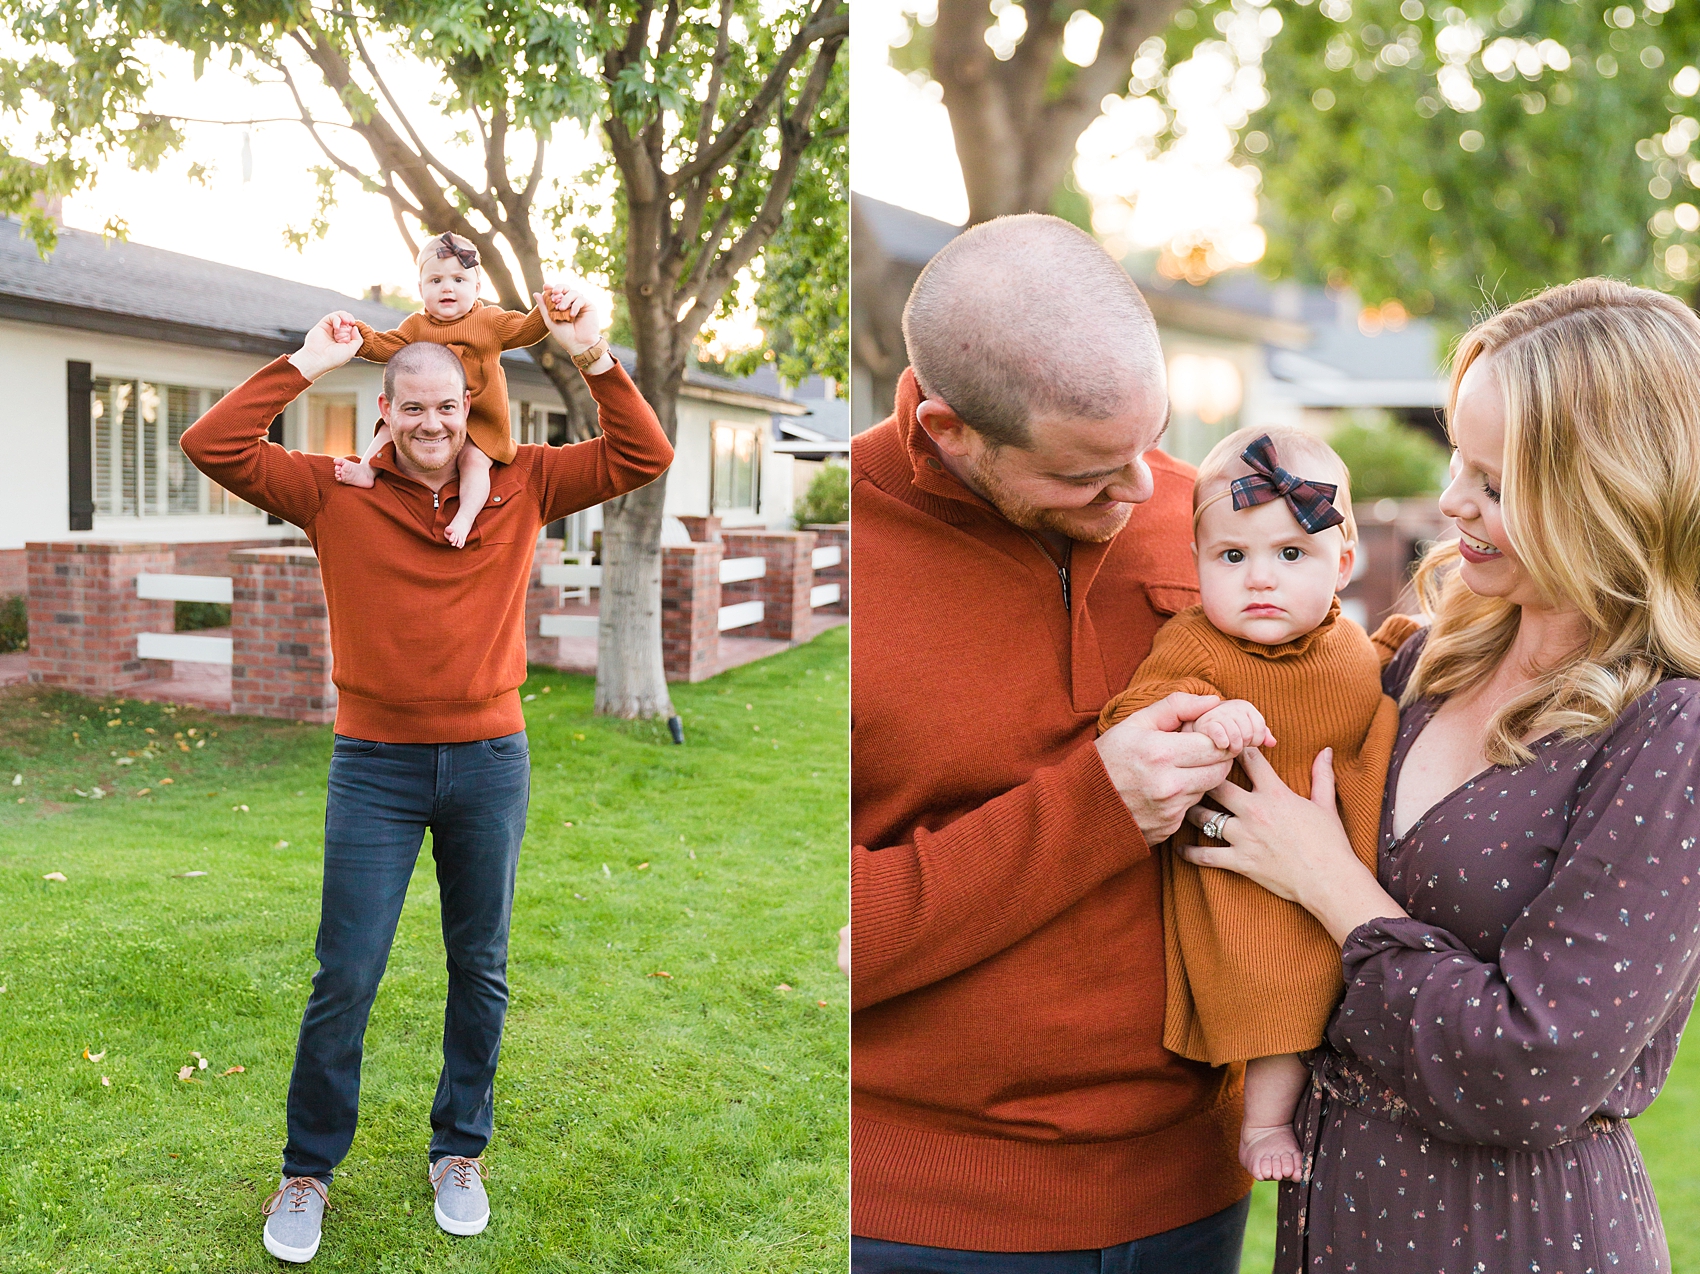 Leah Hope Photography | Scottsdale Phoenix Arizona | Backyard Home Lifestyle Session | Family Pictures | What to Wear